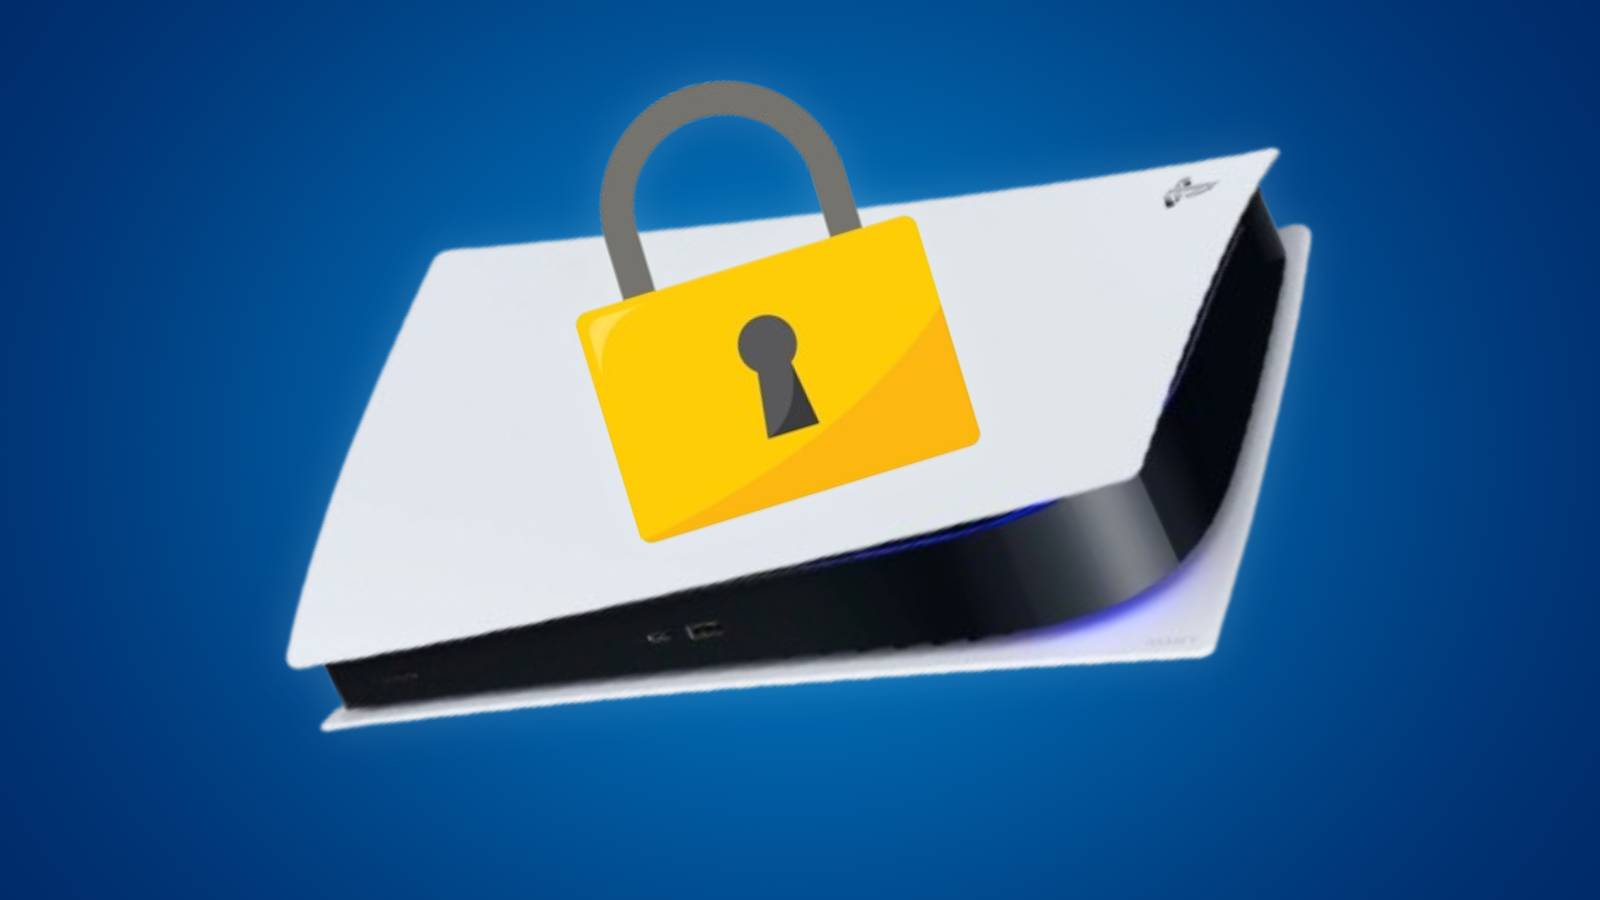 An image of a PS5 with a padlock icon on top by rawpixel.com on Freepik, with a blue background.